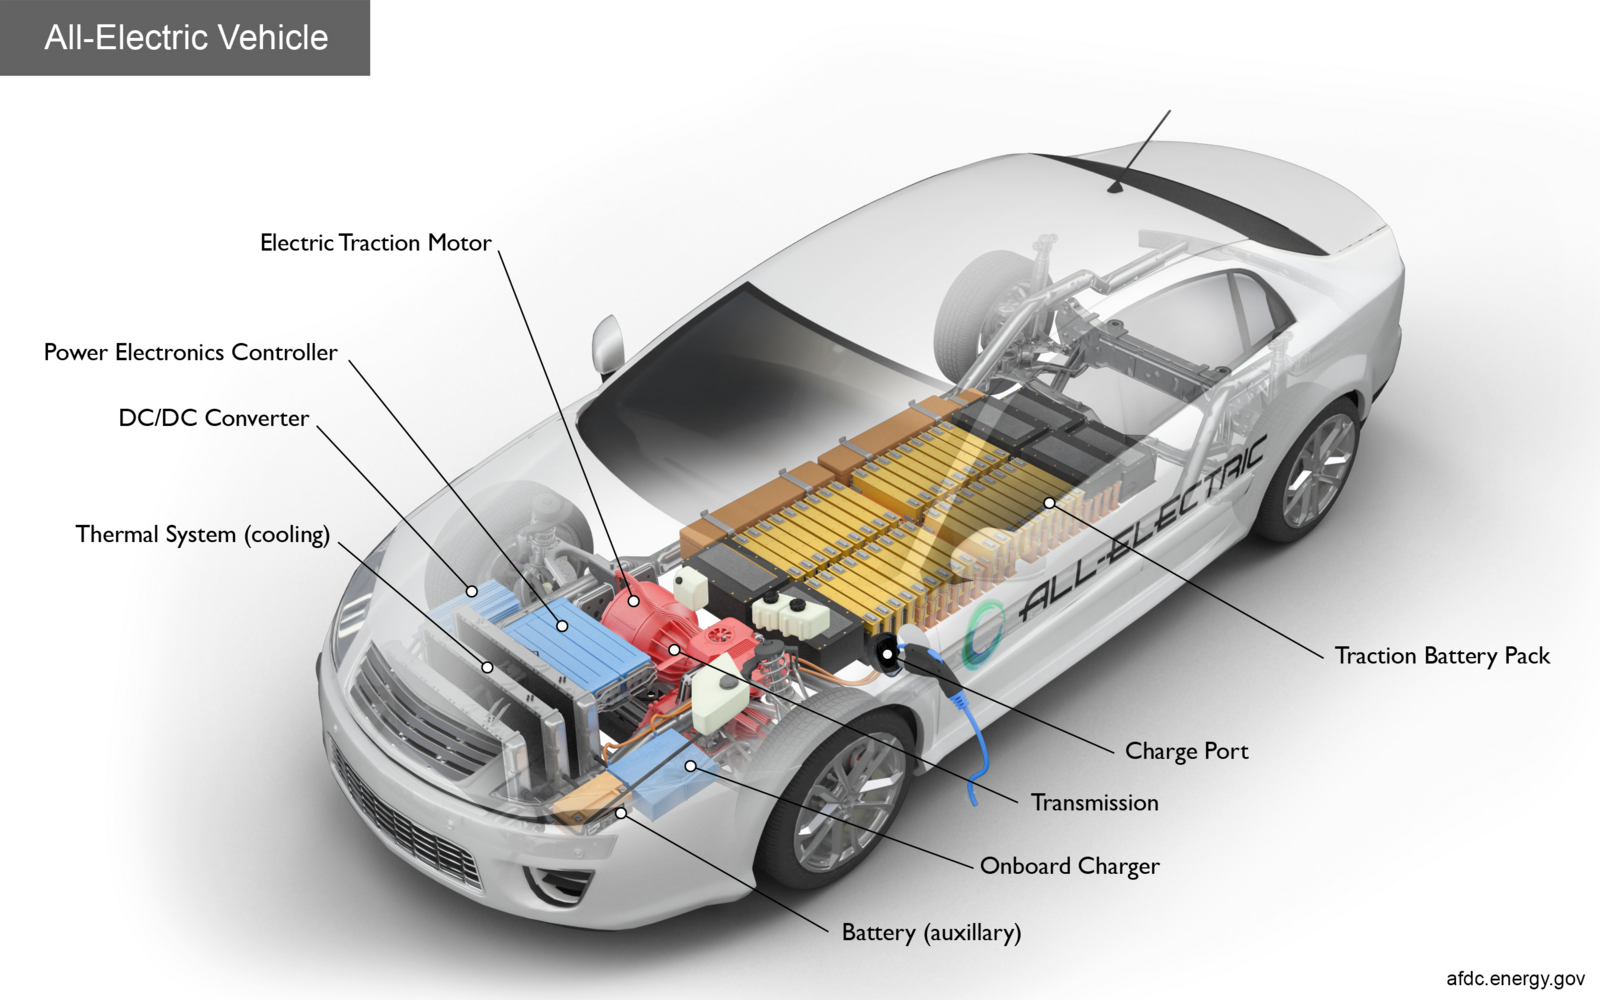 Diagram of the parts of an electric vehicle.